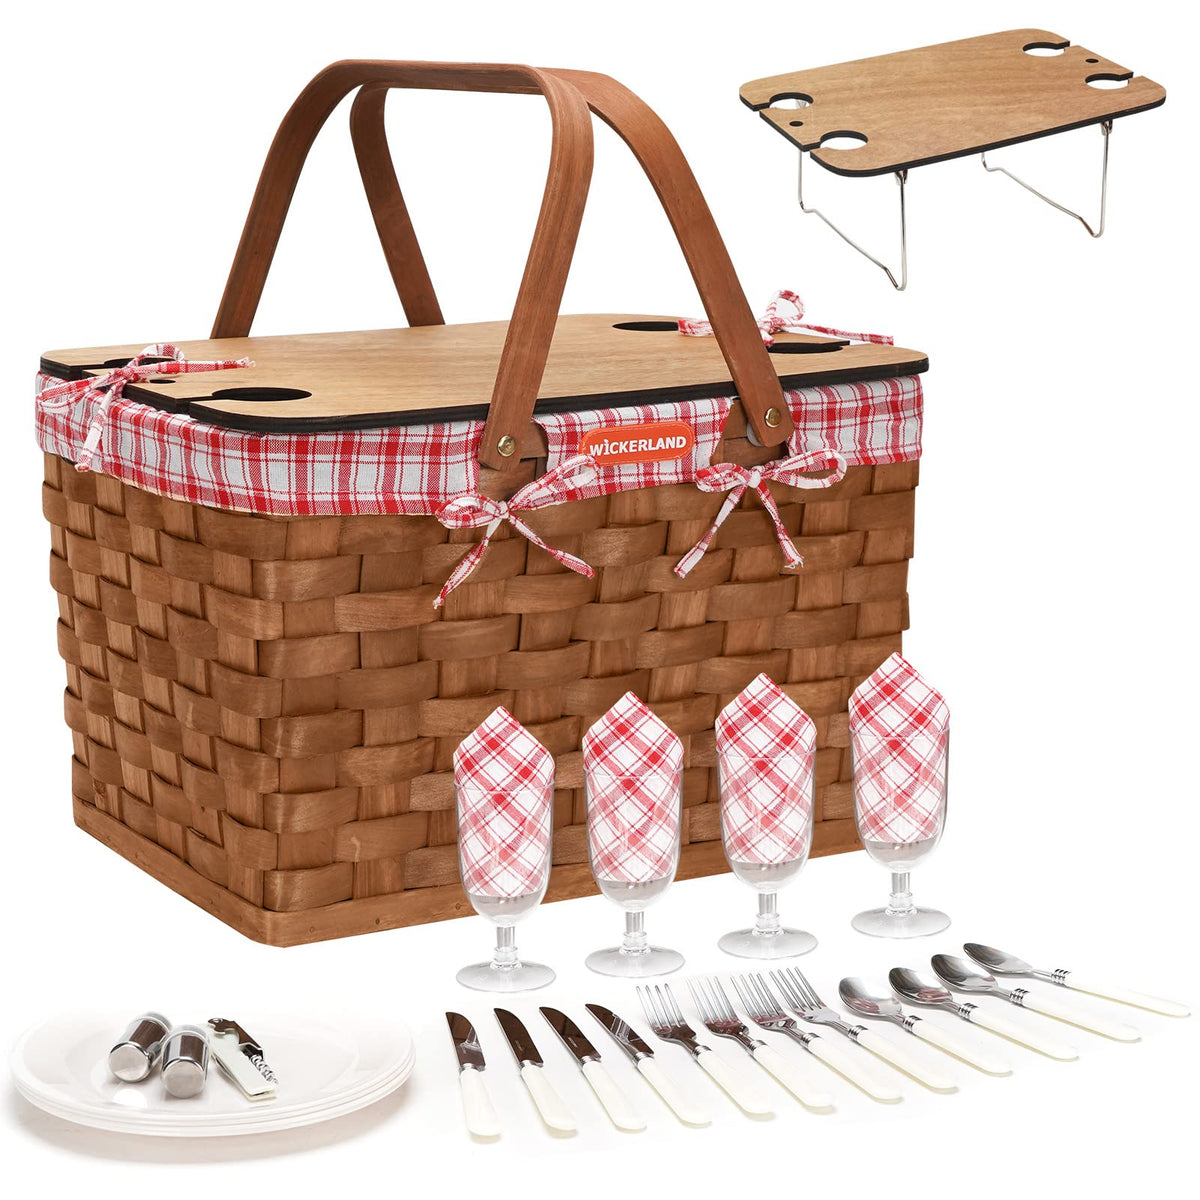 Woodchip Picnic Basket Set for 4 Persons-Walnut Red